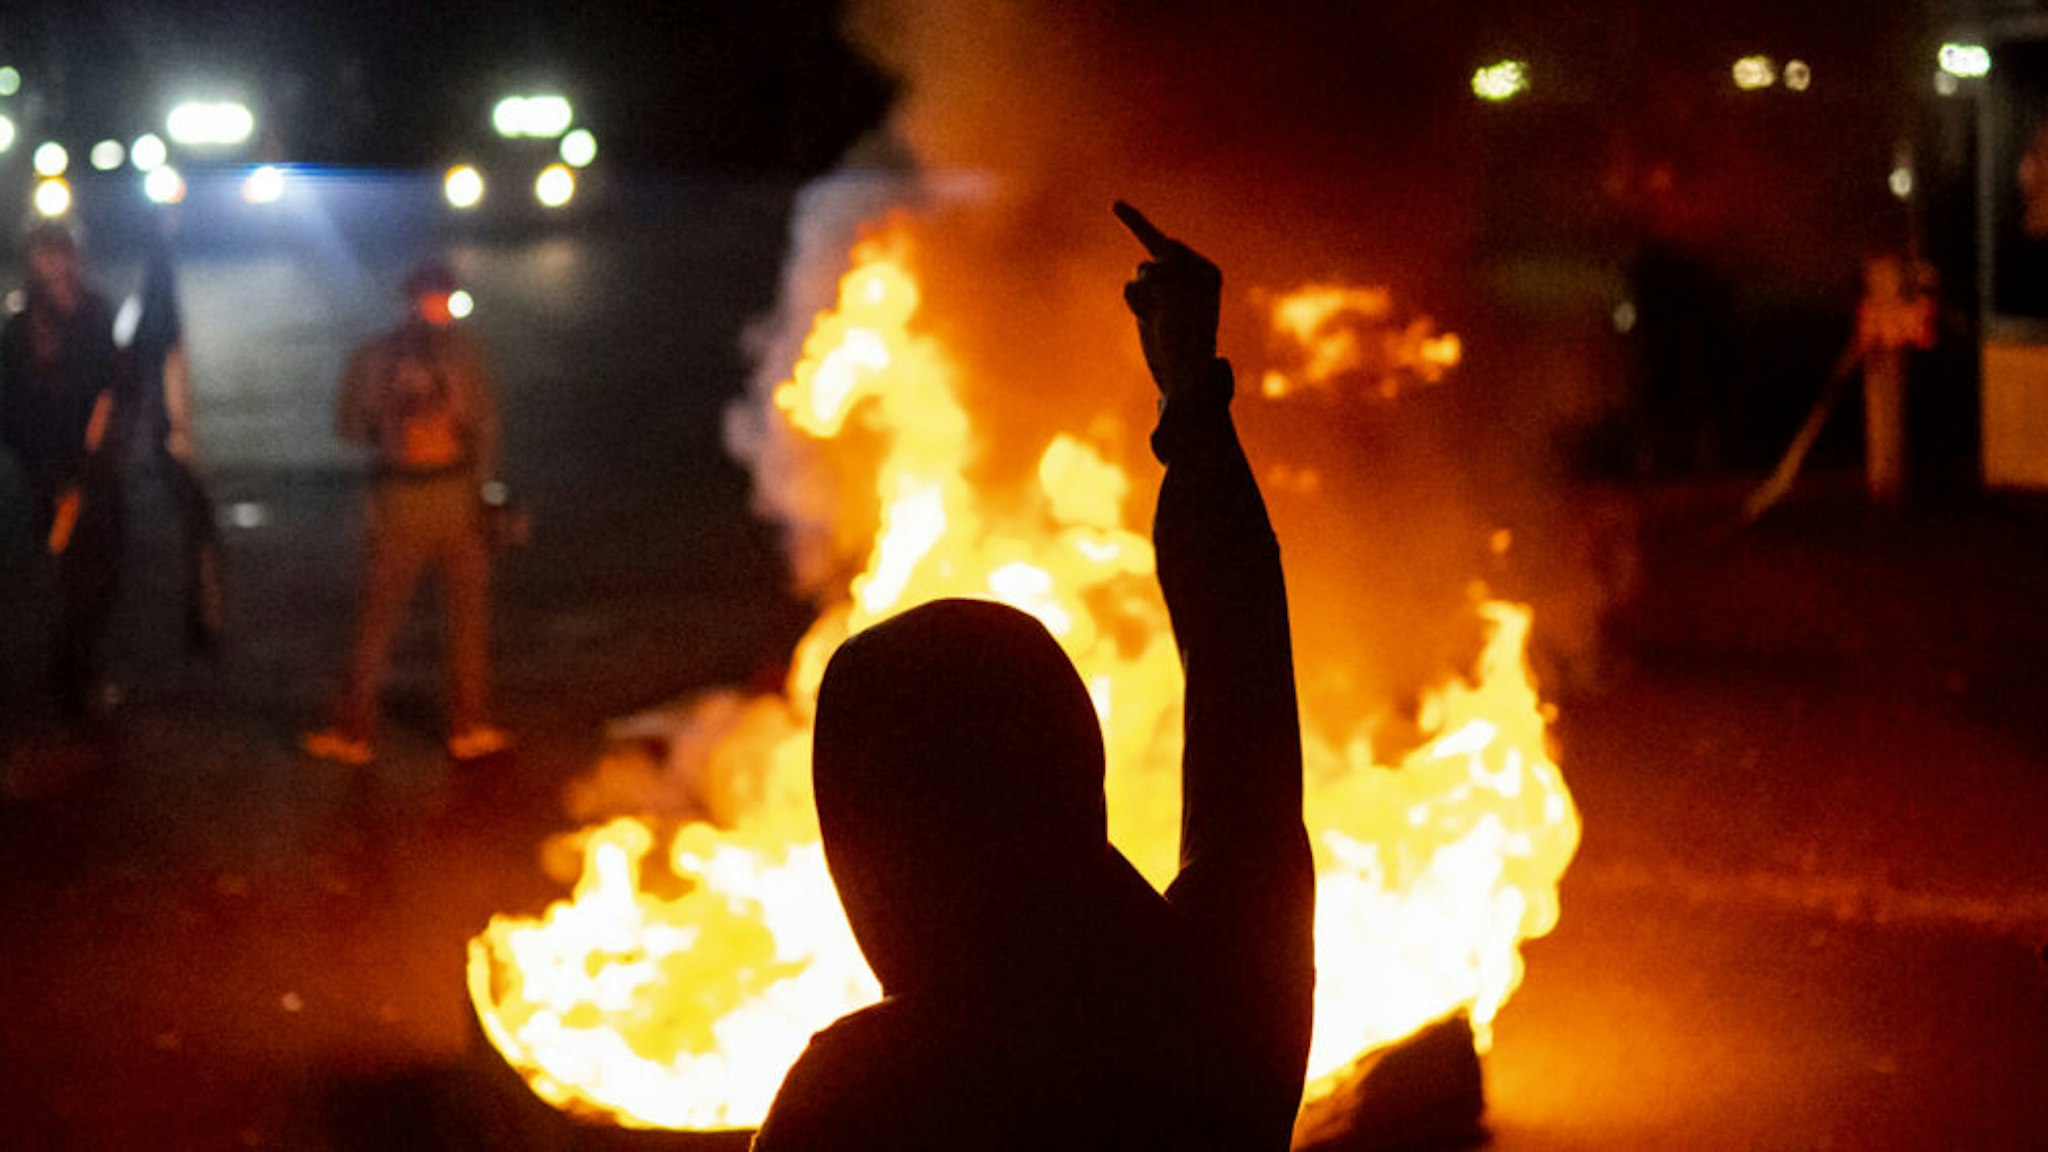 PORTLAND OR - SEPTEMBER 6: Protesters chant in front of a fire near the North police precinct during a protest against racial injustice and police brutality on September 6, 2020 in Portland, Oregon. Sunday marked the 101st consecutive night of protests in Portland.